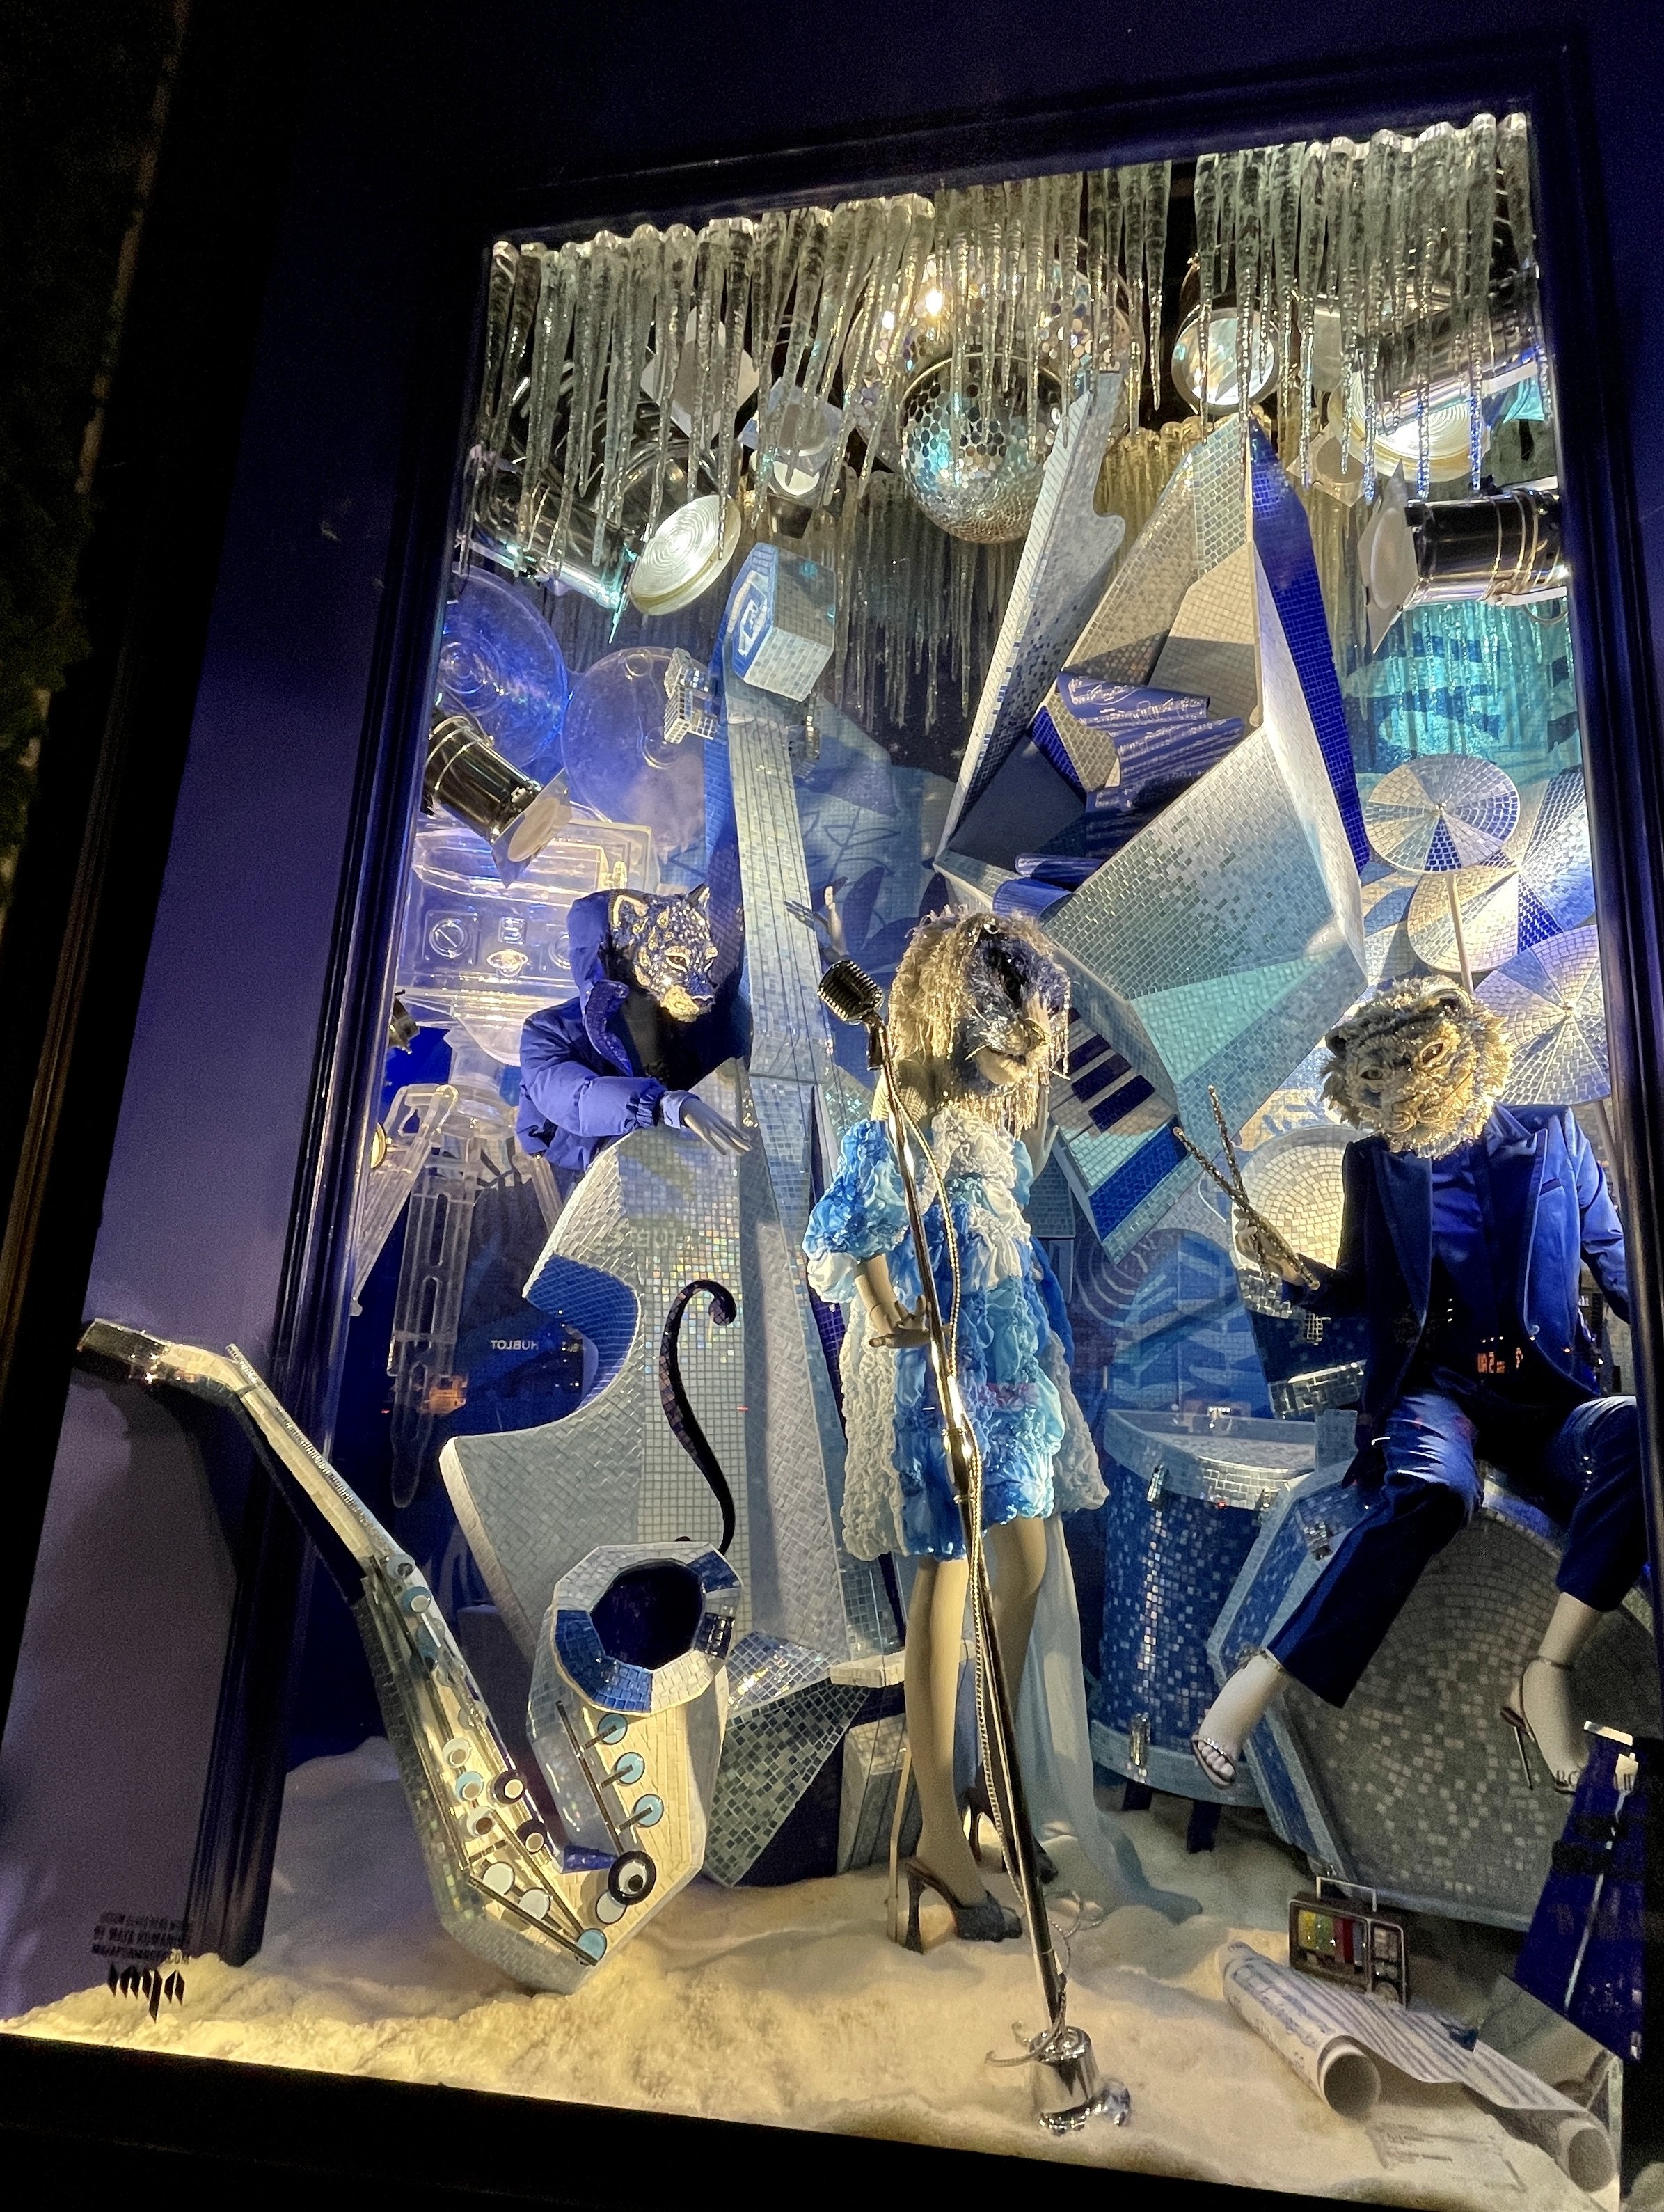  “Creating Bergdorf Goodman holiday windows takes ten months, involves over 100 people, and requires about three weeks to install.” 